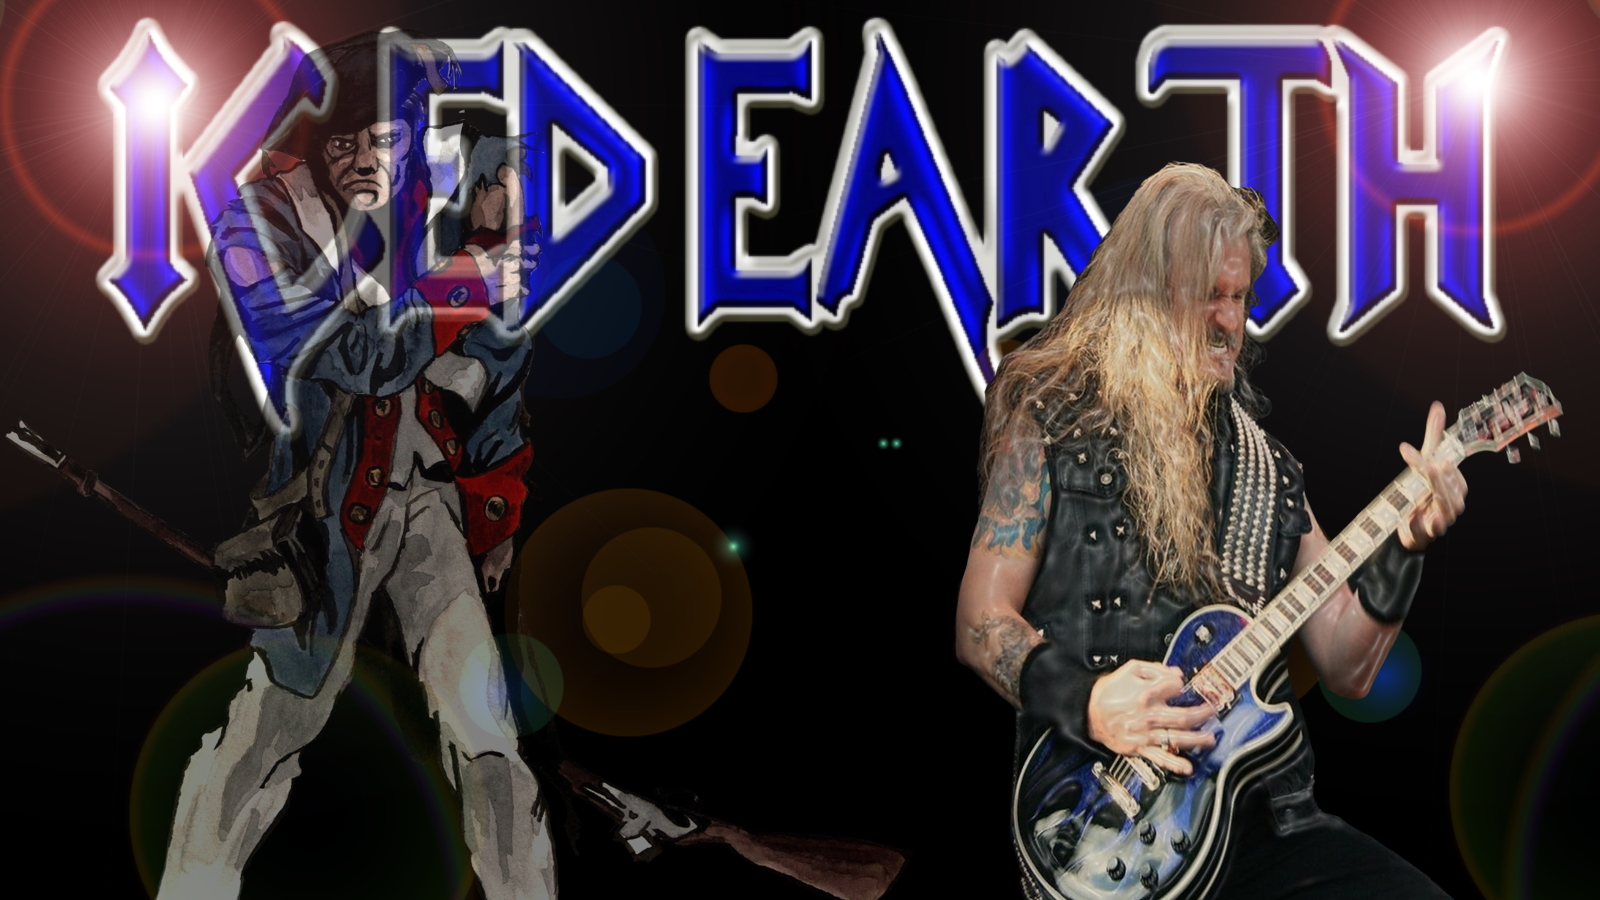 iced, Earth, Heavy, Metal, Hard, Rock, Groups, Bands, Album, Covers, Tattoo, Guitars, Concert Wallpaper